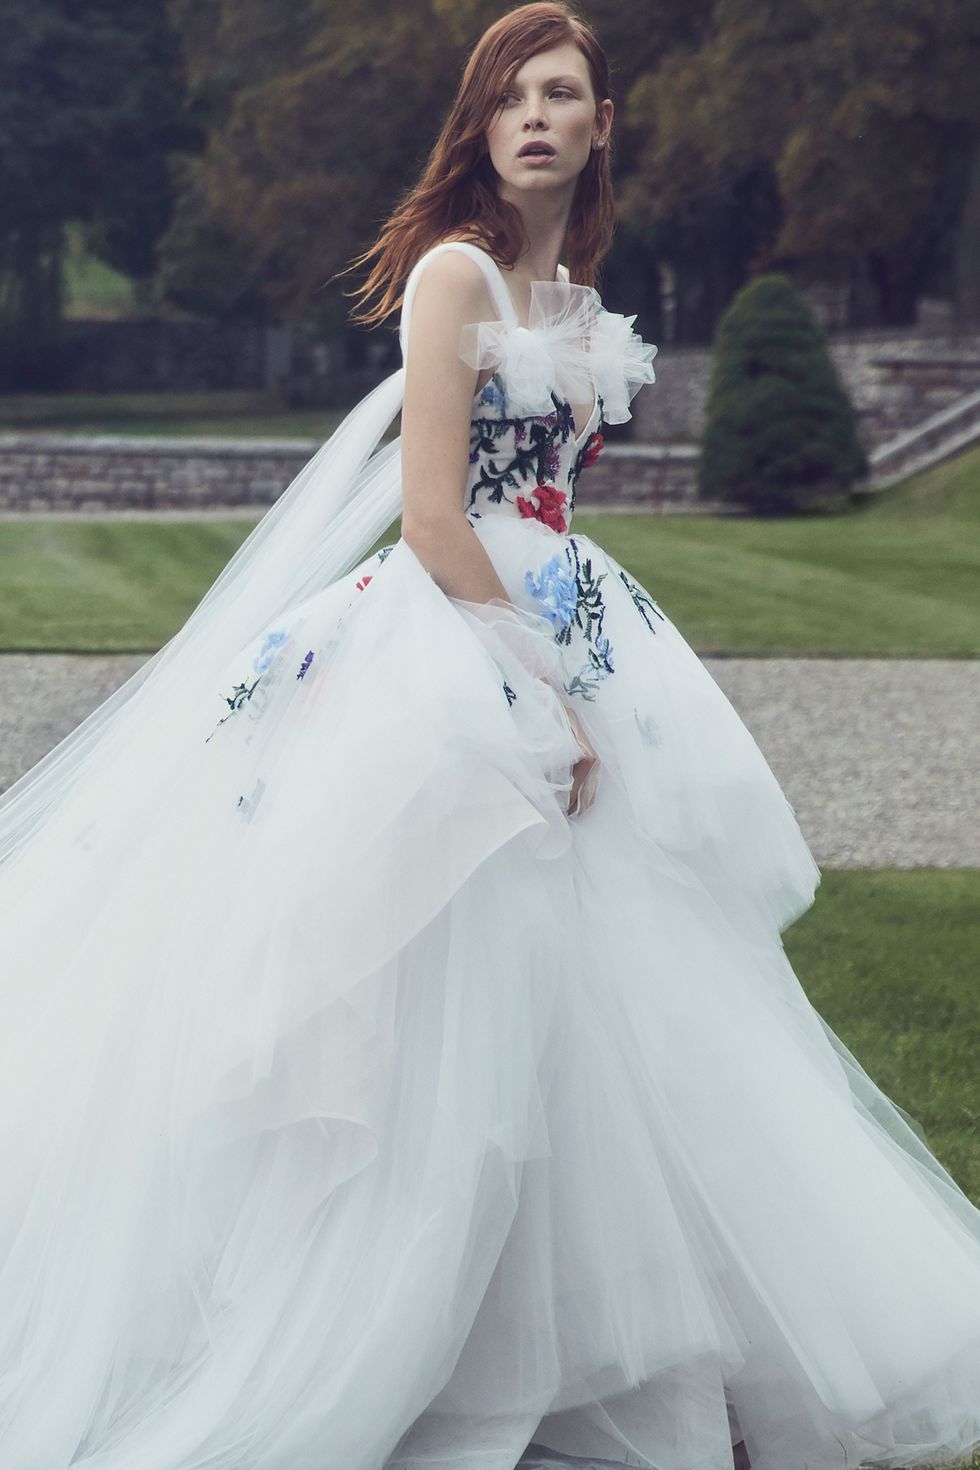 https://hips.hearstapps.com/hmg-prod/images/00007-monique-lhuilier-fall-2019-bridal-1539104325.jpg?crop=1xw:1xh;center,top&resize=980:*